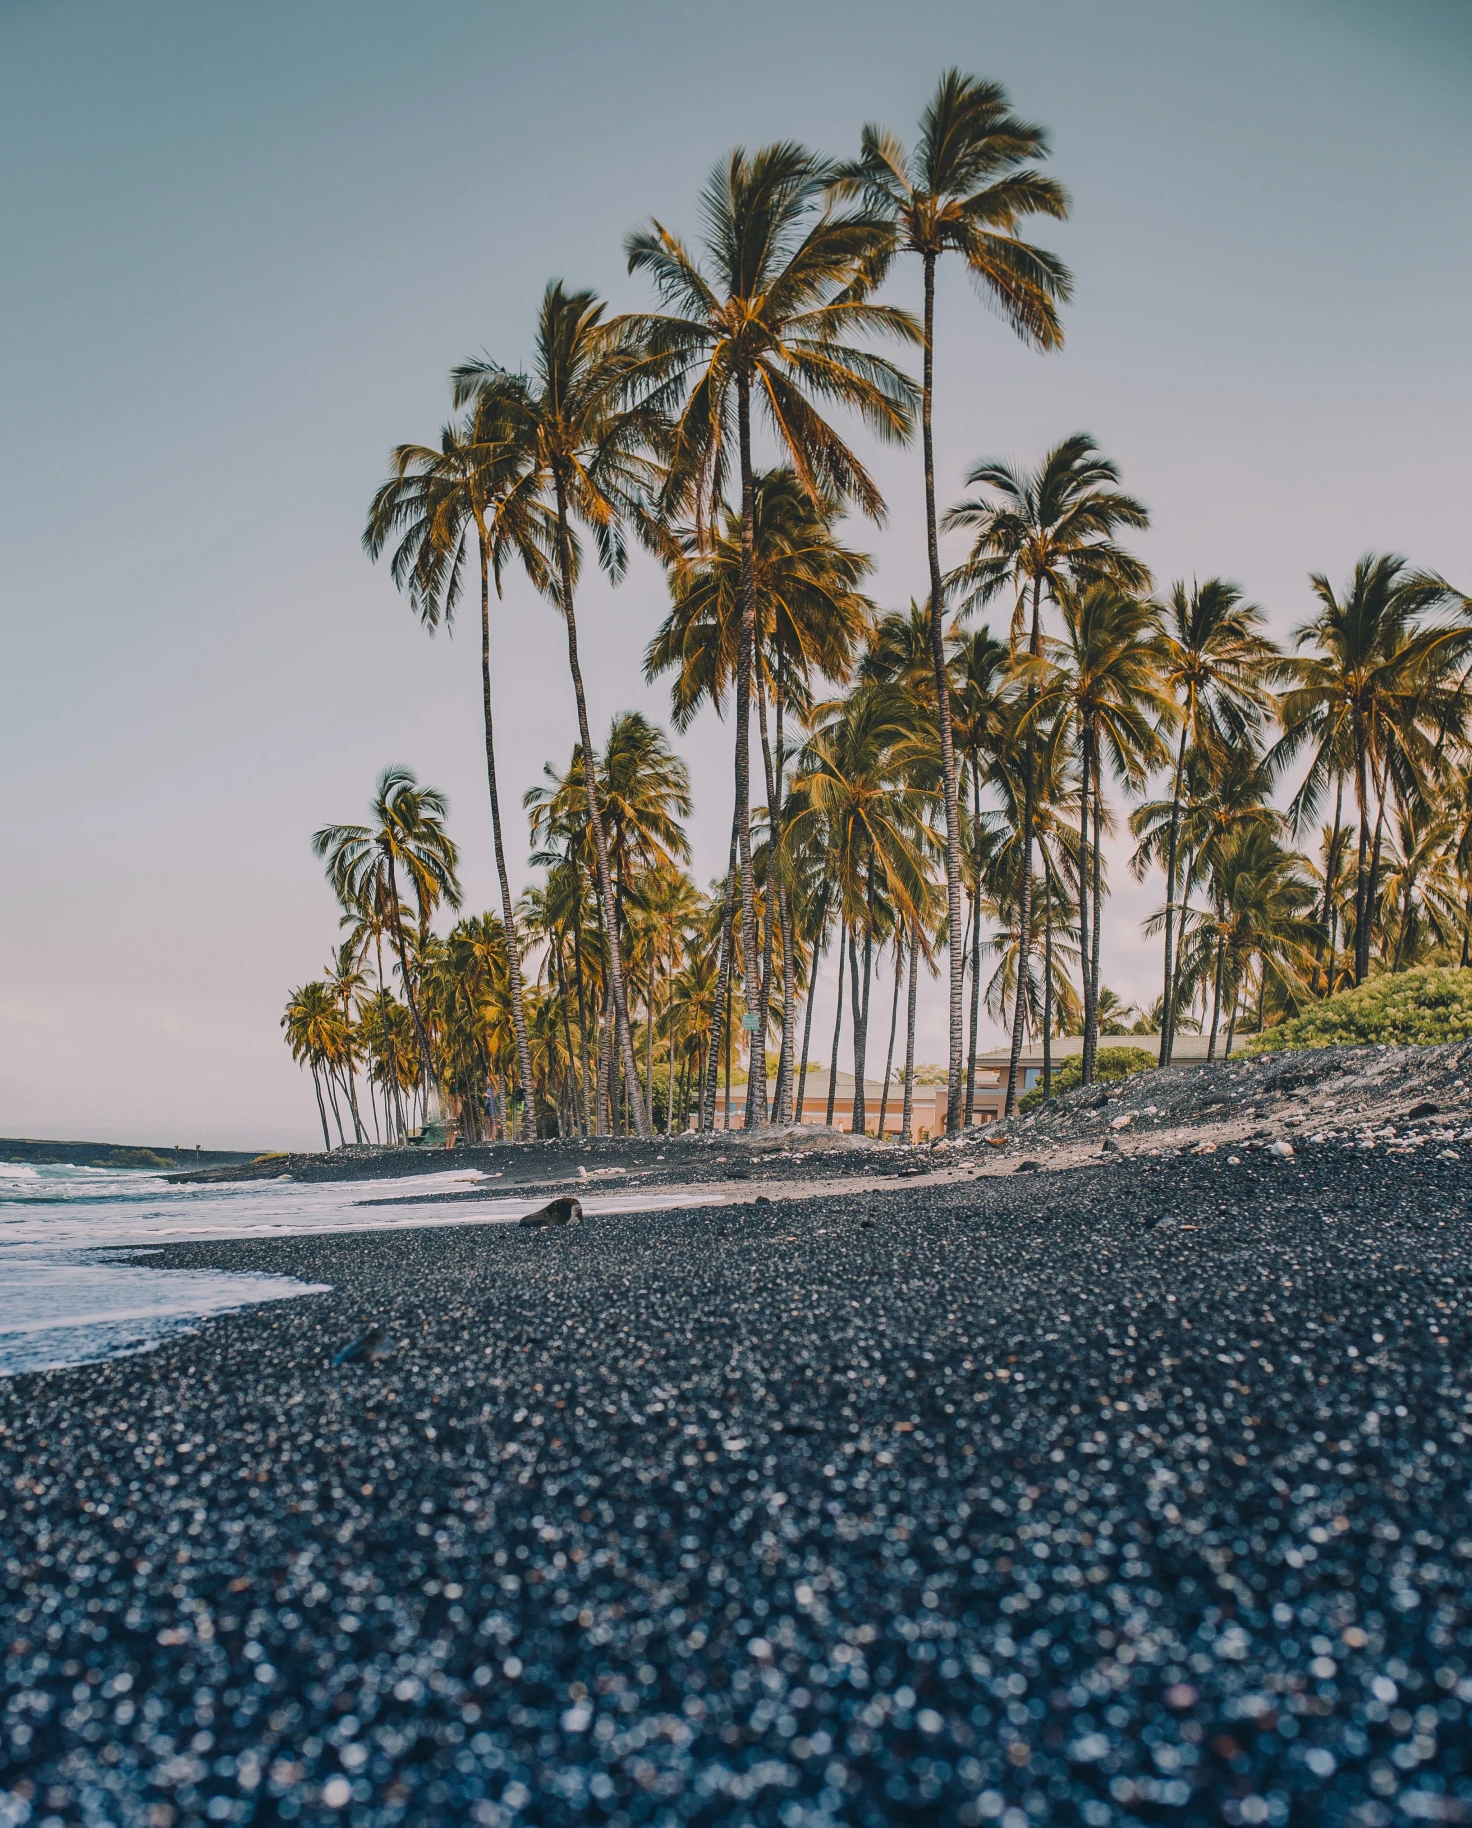 black sand beach with palm trees during sunset, a must-see for a weekend in Hawaii